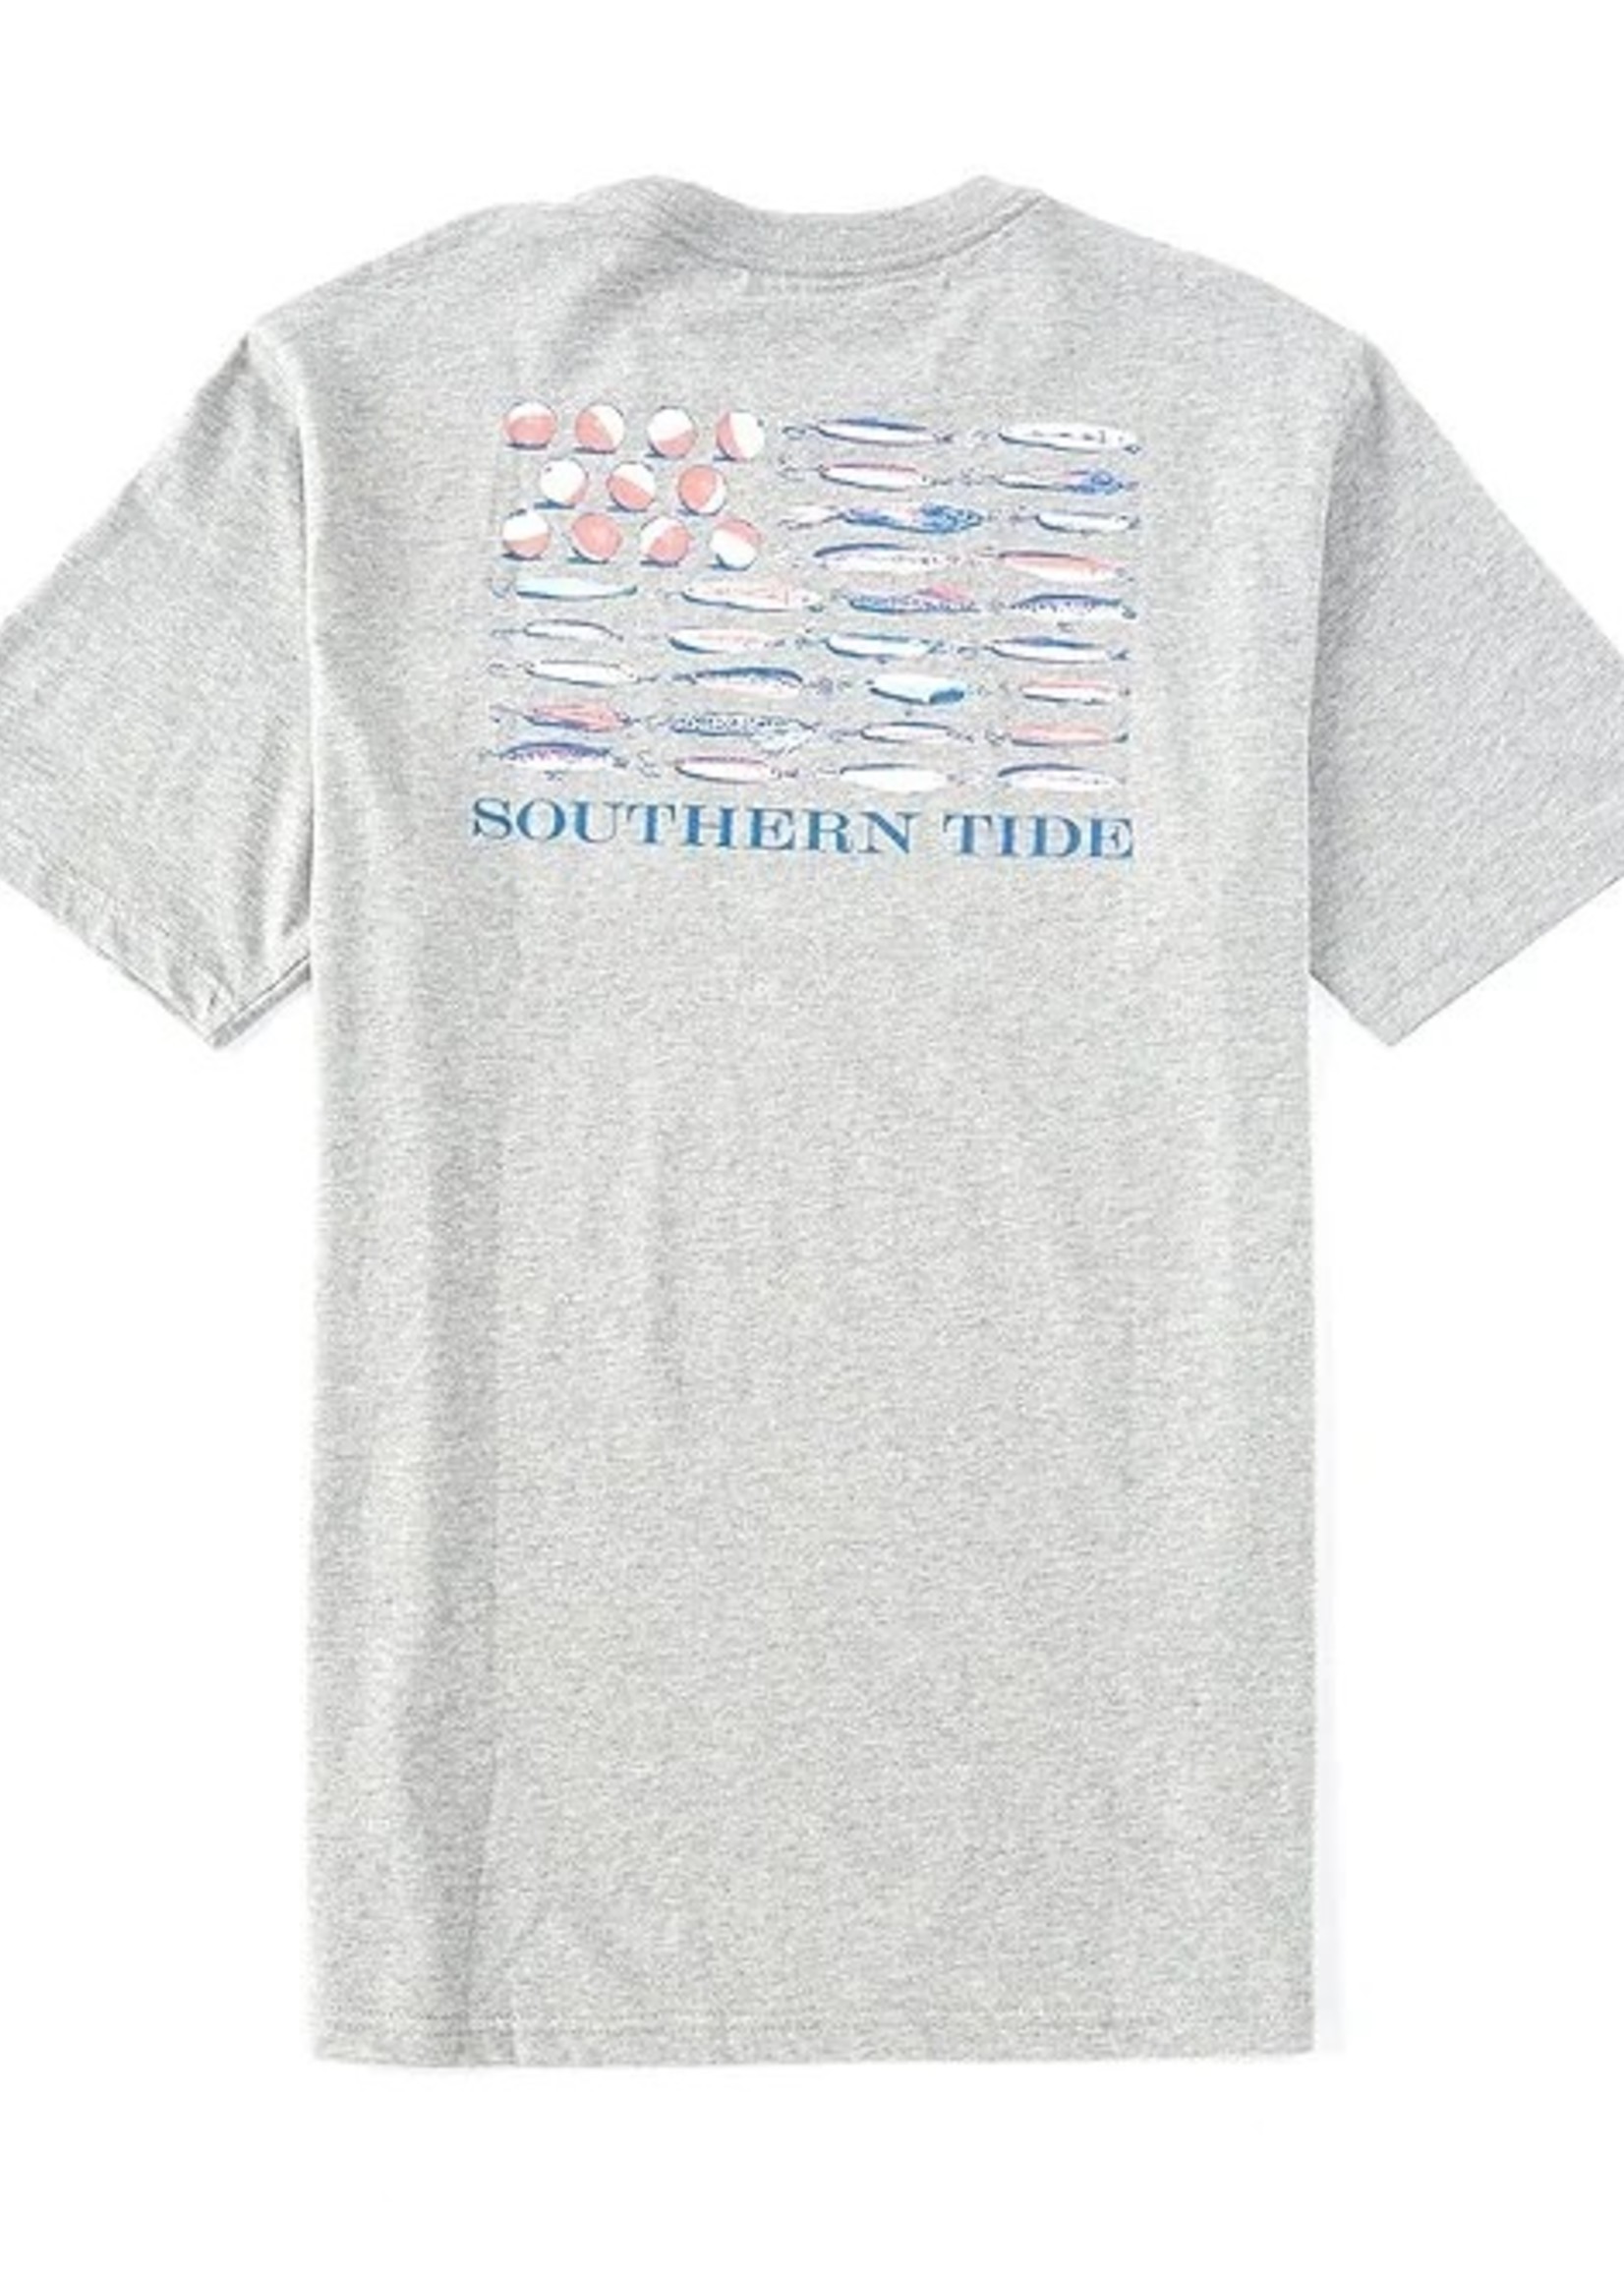 Southern Tide Bobbers and Lure Heather Tee